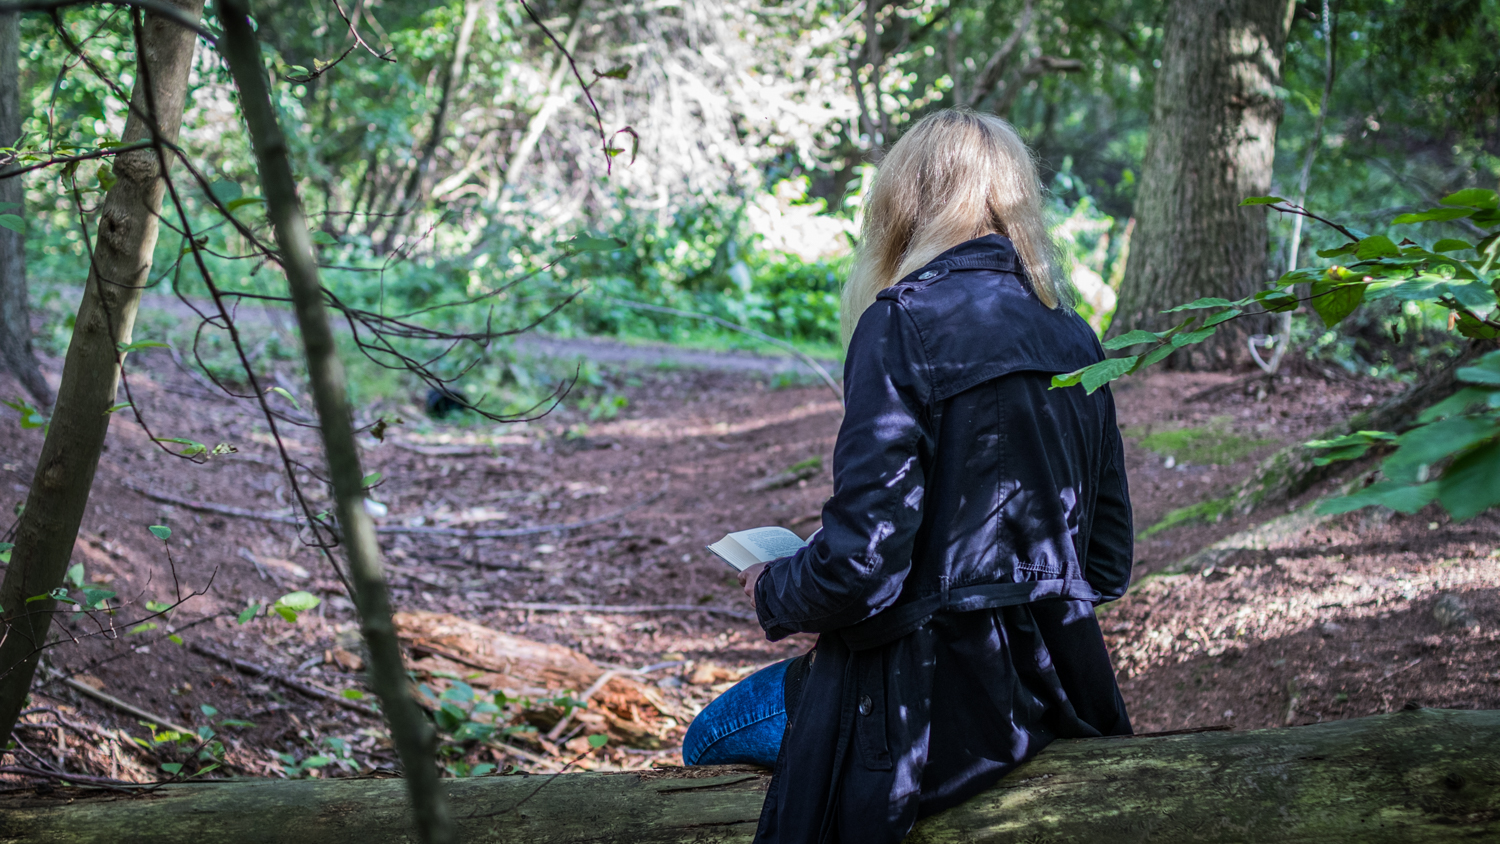 A young woman (me) reading a book in the forest